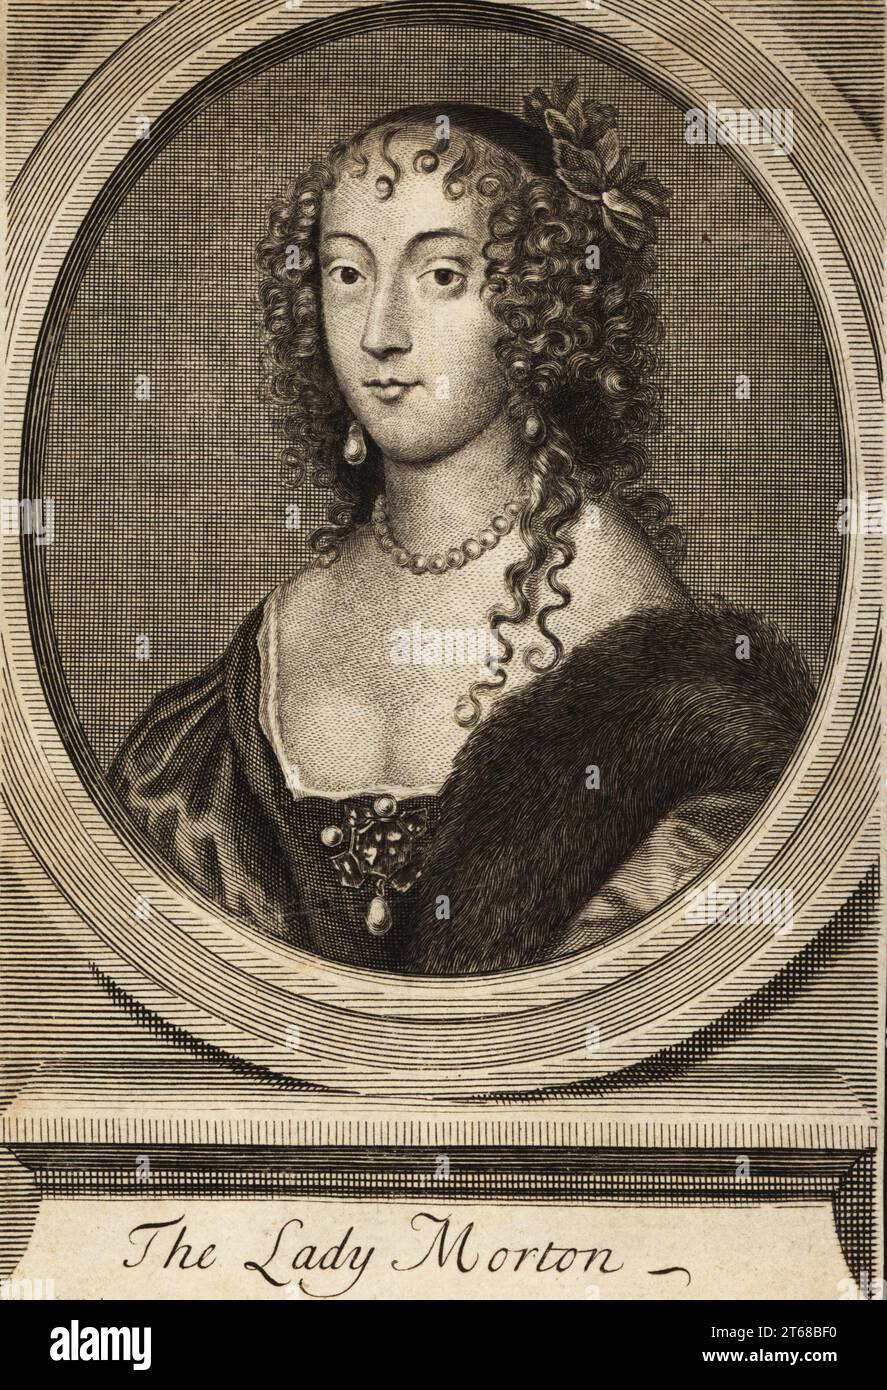 Anne Douglas, Countess of Morton (c. 1610-1654), born Anne Villiers, English noblewoman, famed for her beauty, bravery and loyalty to the throne. Daughter of Sir Edward Villiers, married to Robert Douglas, Lord Dalkeith, later Earl of Morton. The Lady Morton. Copperplate engraving after a painting by Theodore Russel, London, 1790s. Stock Photo